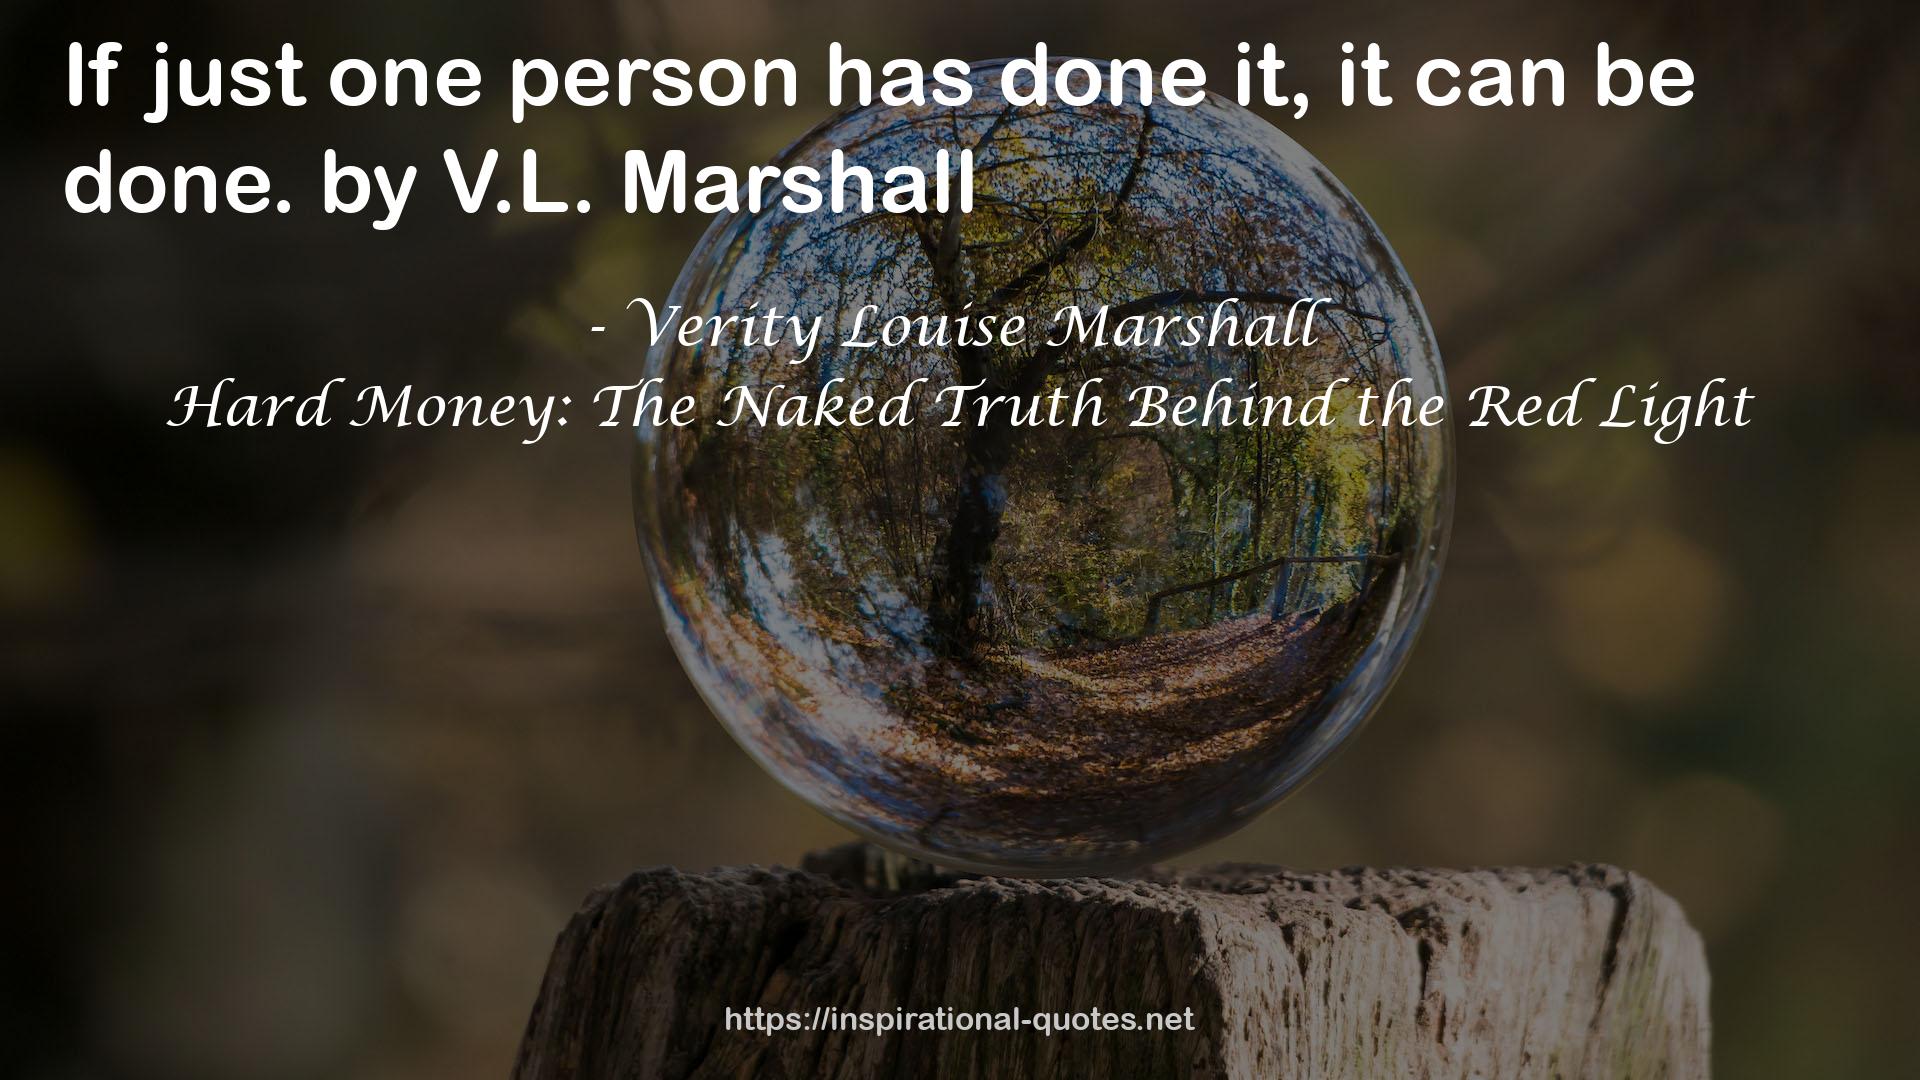 Verity Louise Marshall QUOTES